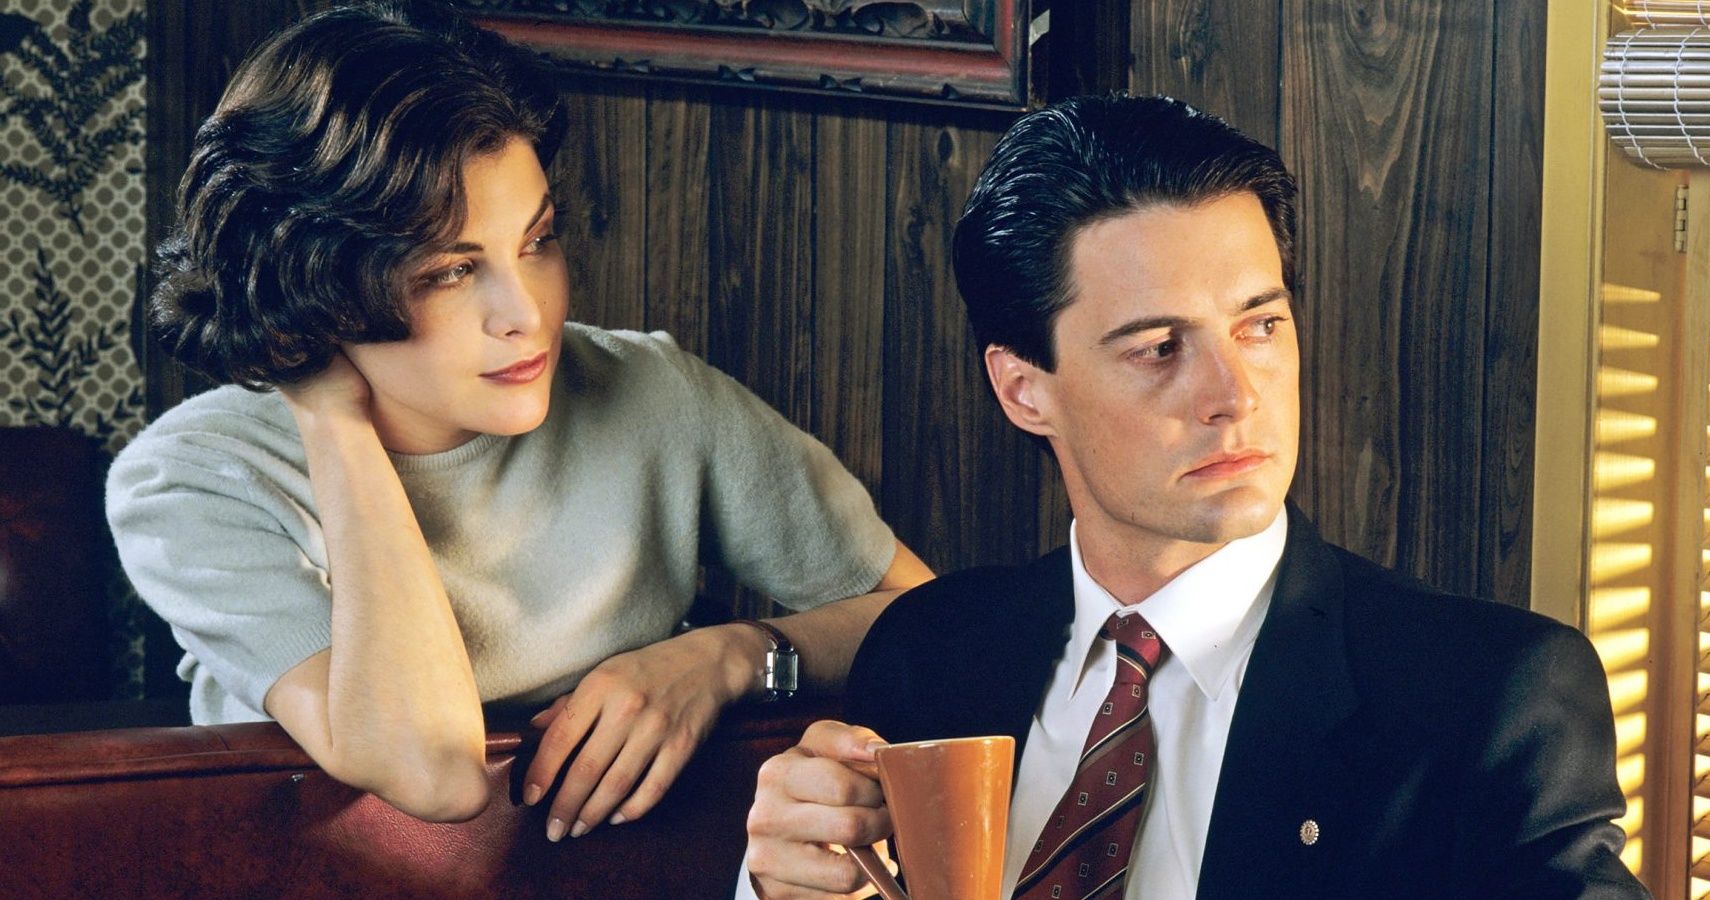 Dale Cooper and Audrey Horne looking out a window